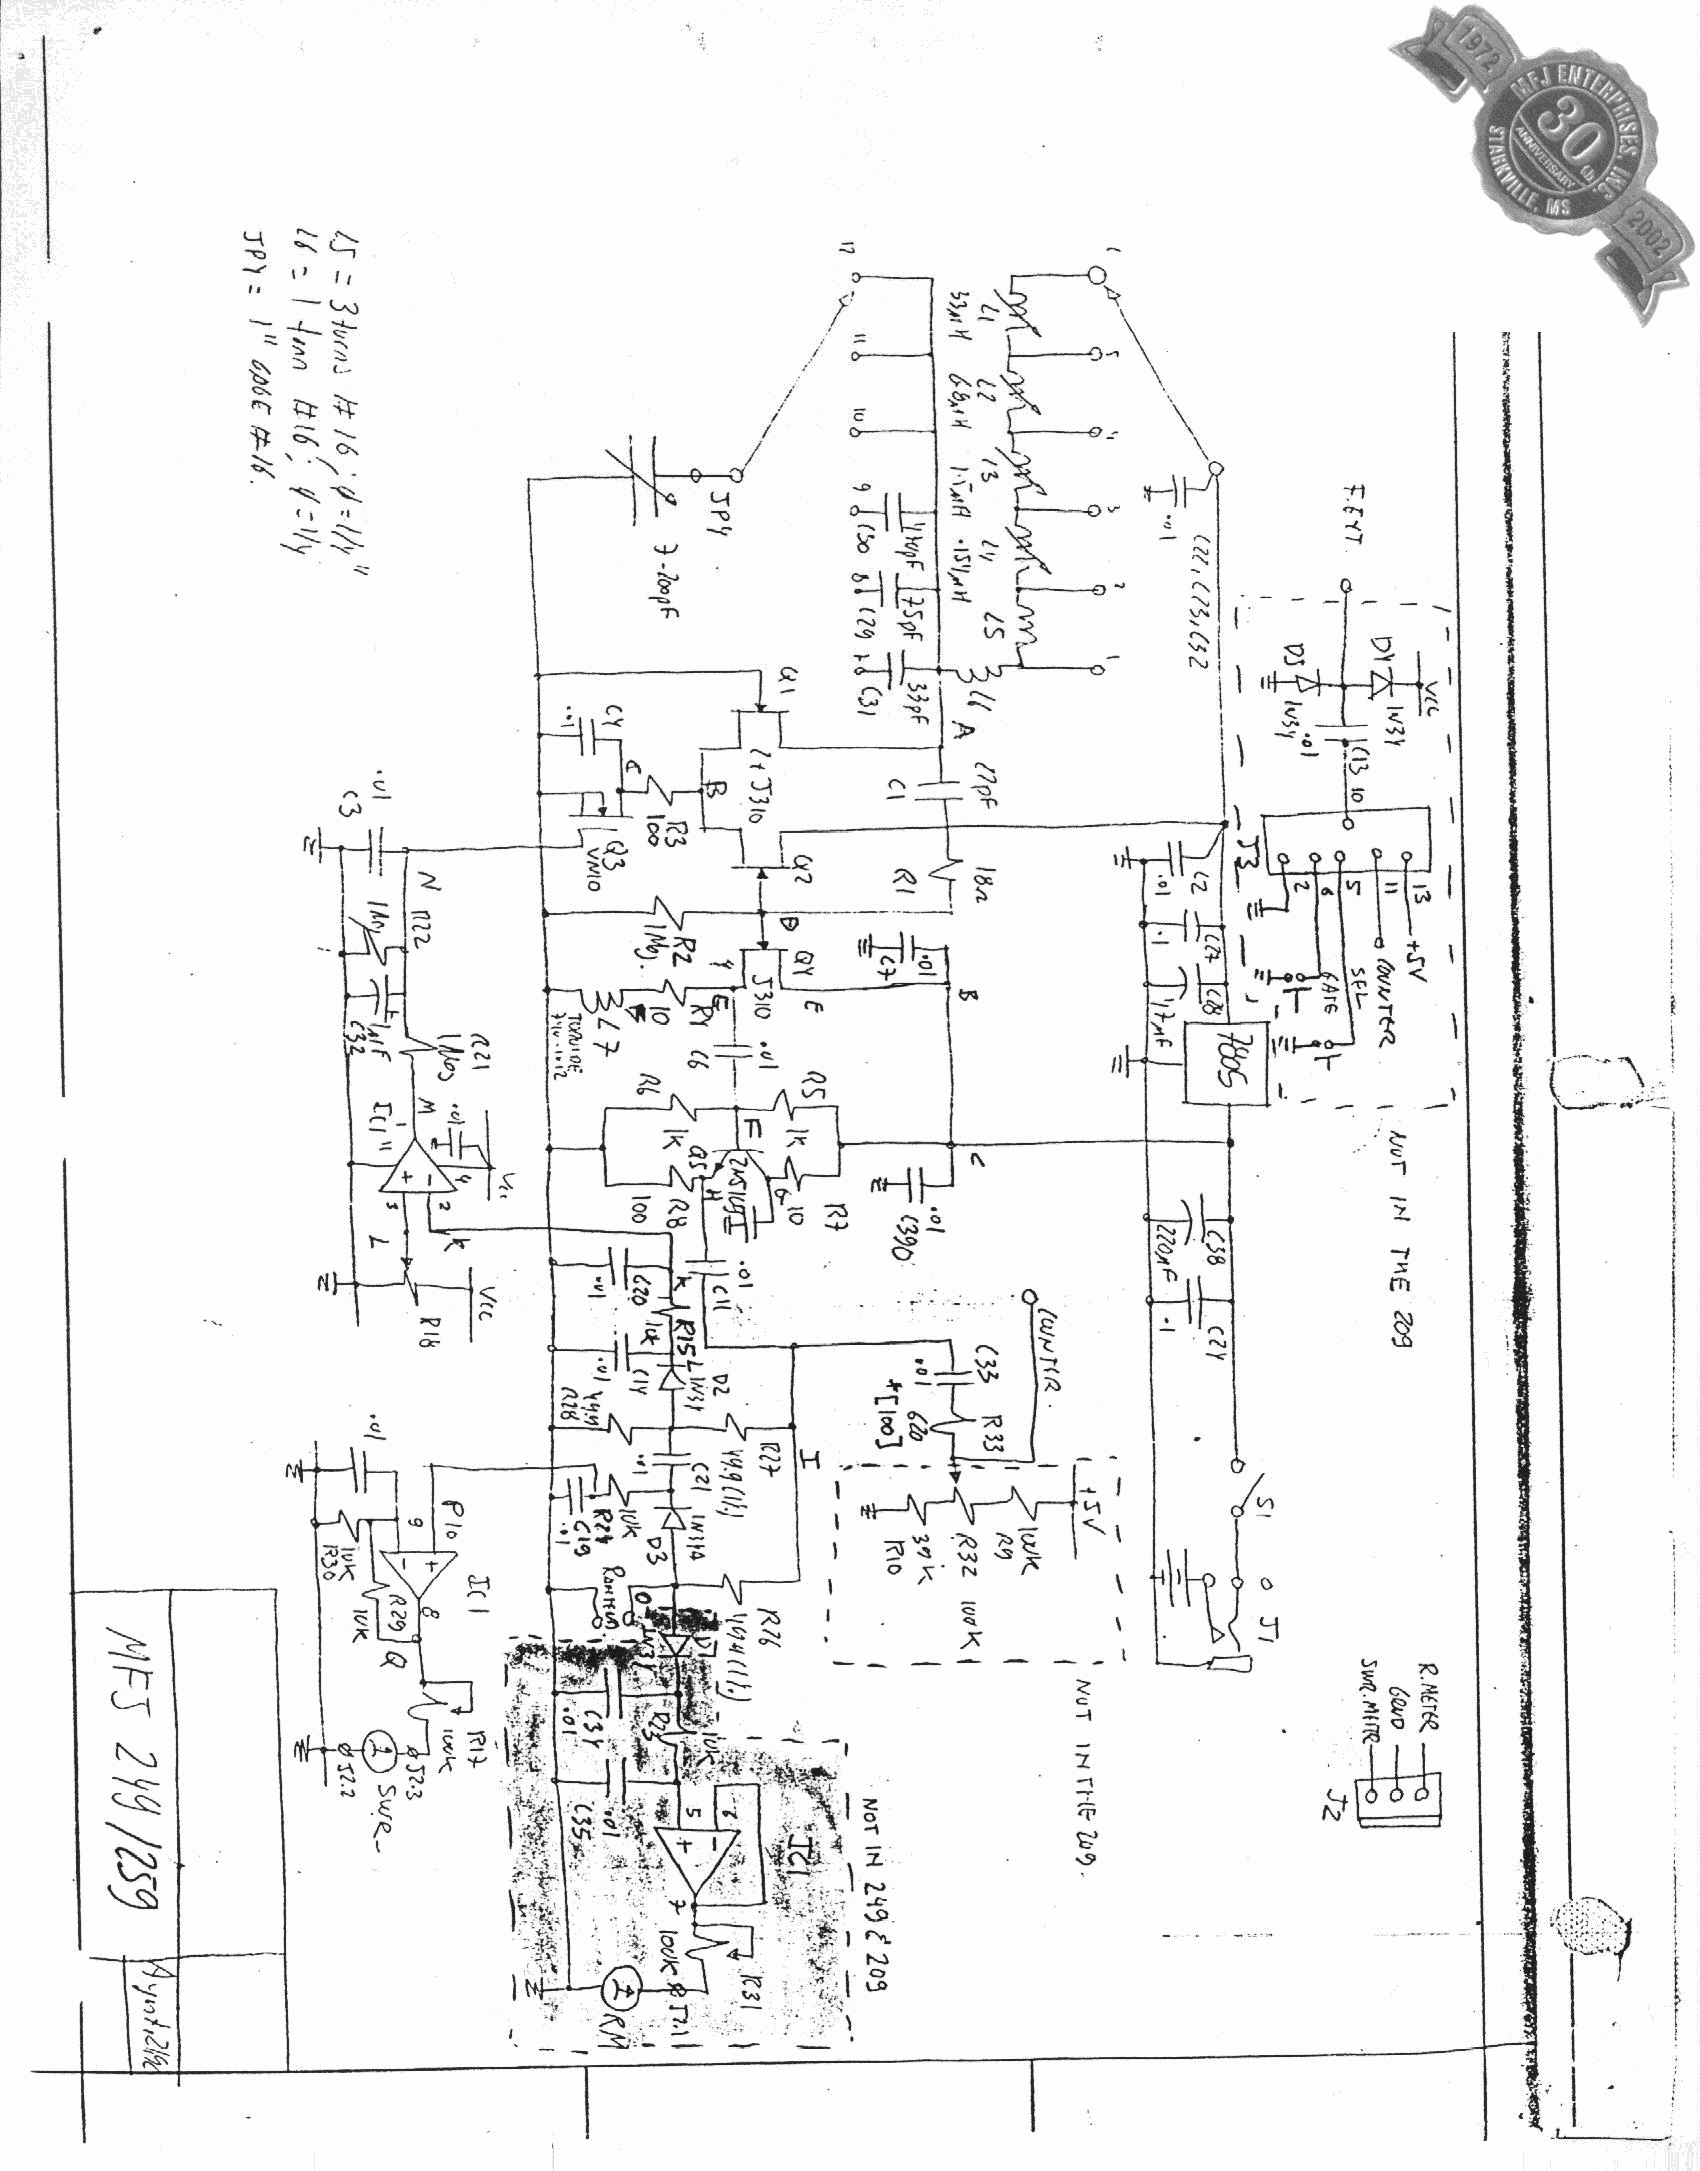 Image Result For Ac15c1 Schematic